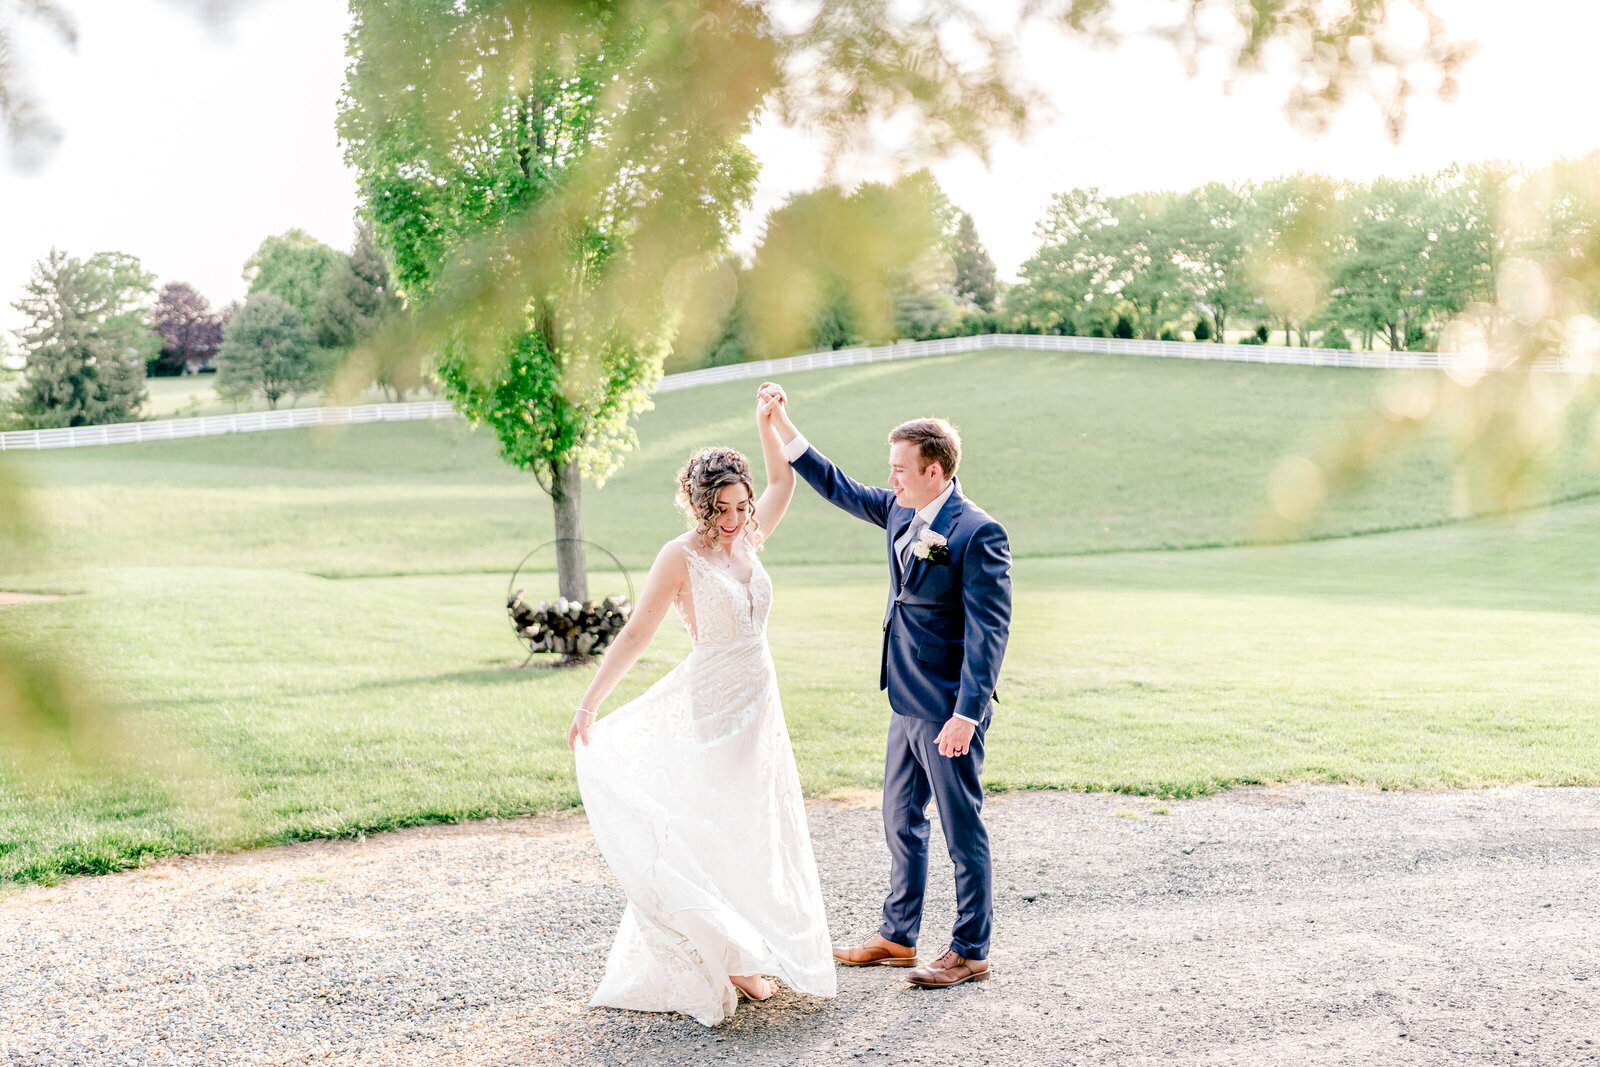 A bride and groom dancing together at golden hour during their wedding at Blue Hill Farm in Northern Virginia